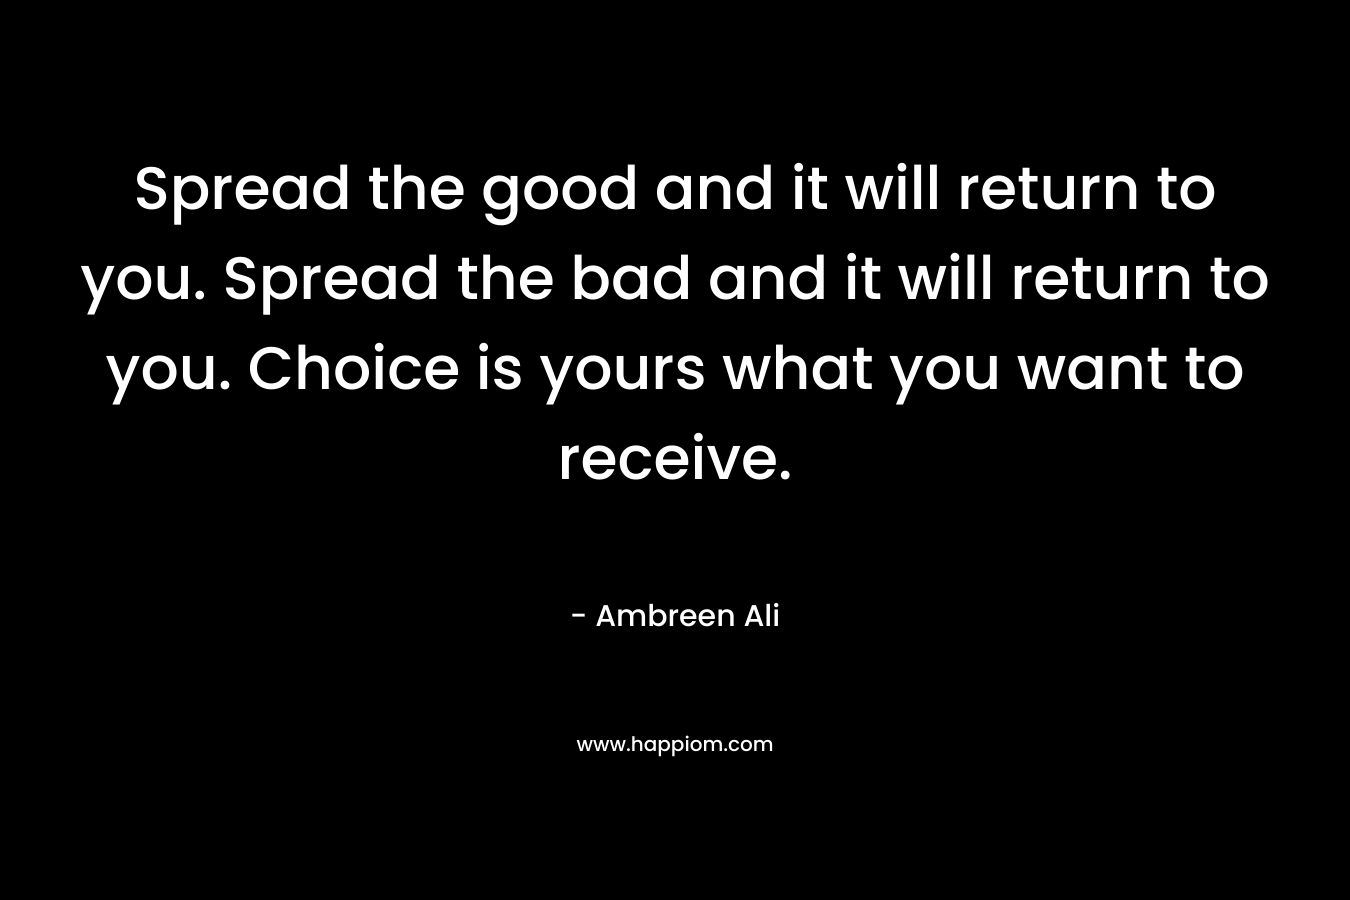 Spread the good and it will return to you. Spread the bad and it will return to you. Choice is yours what you want to receive.